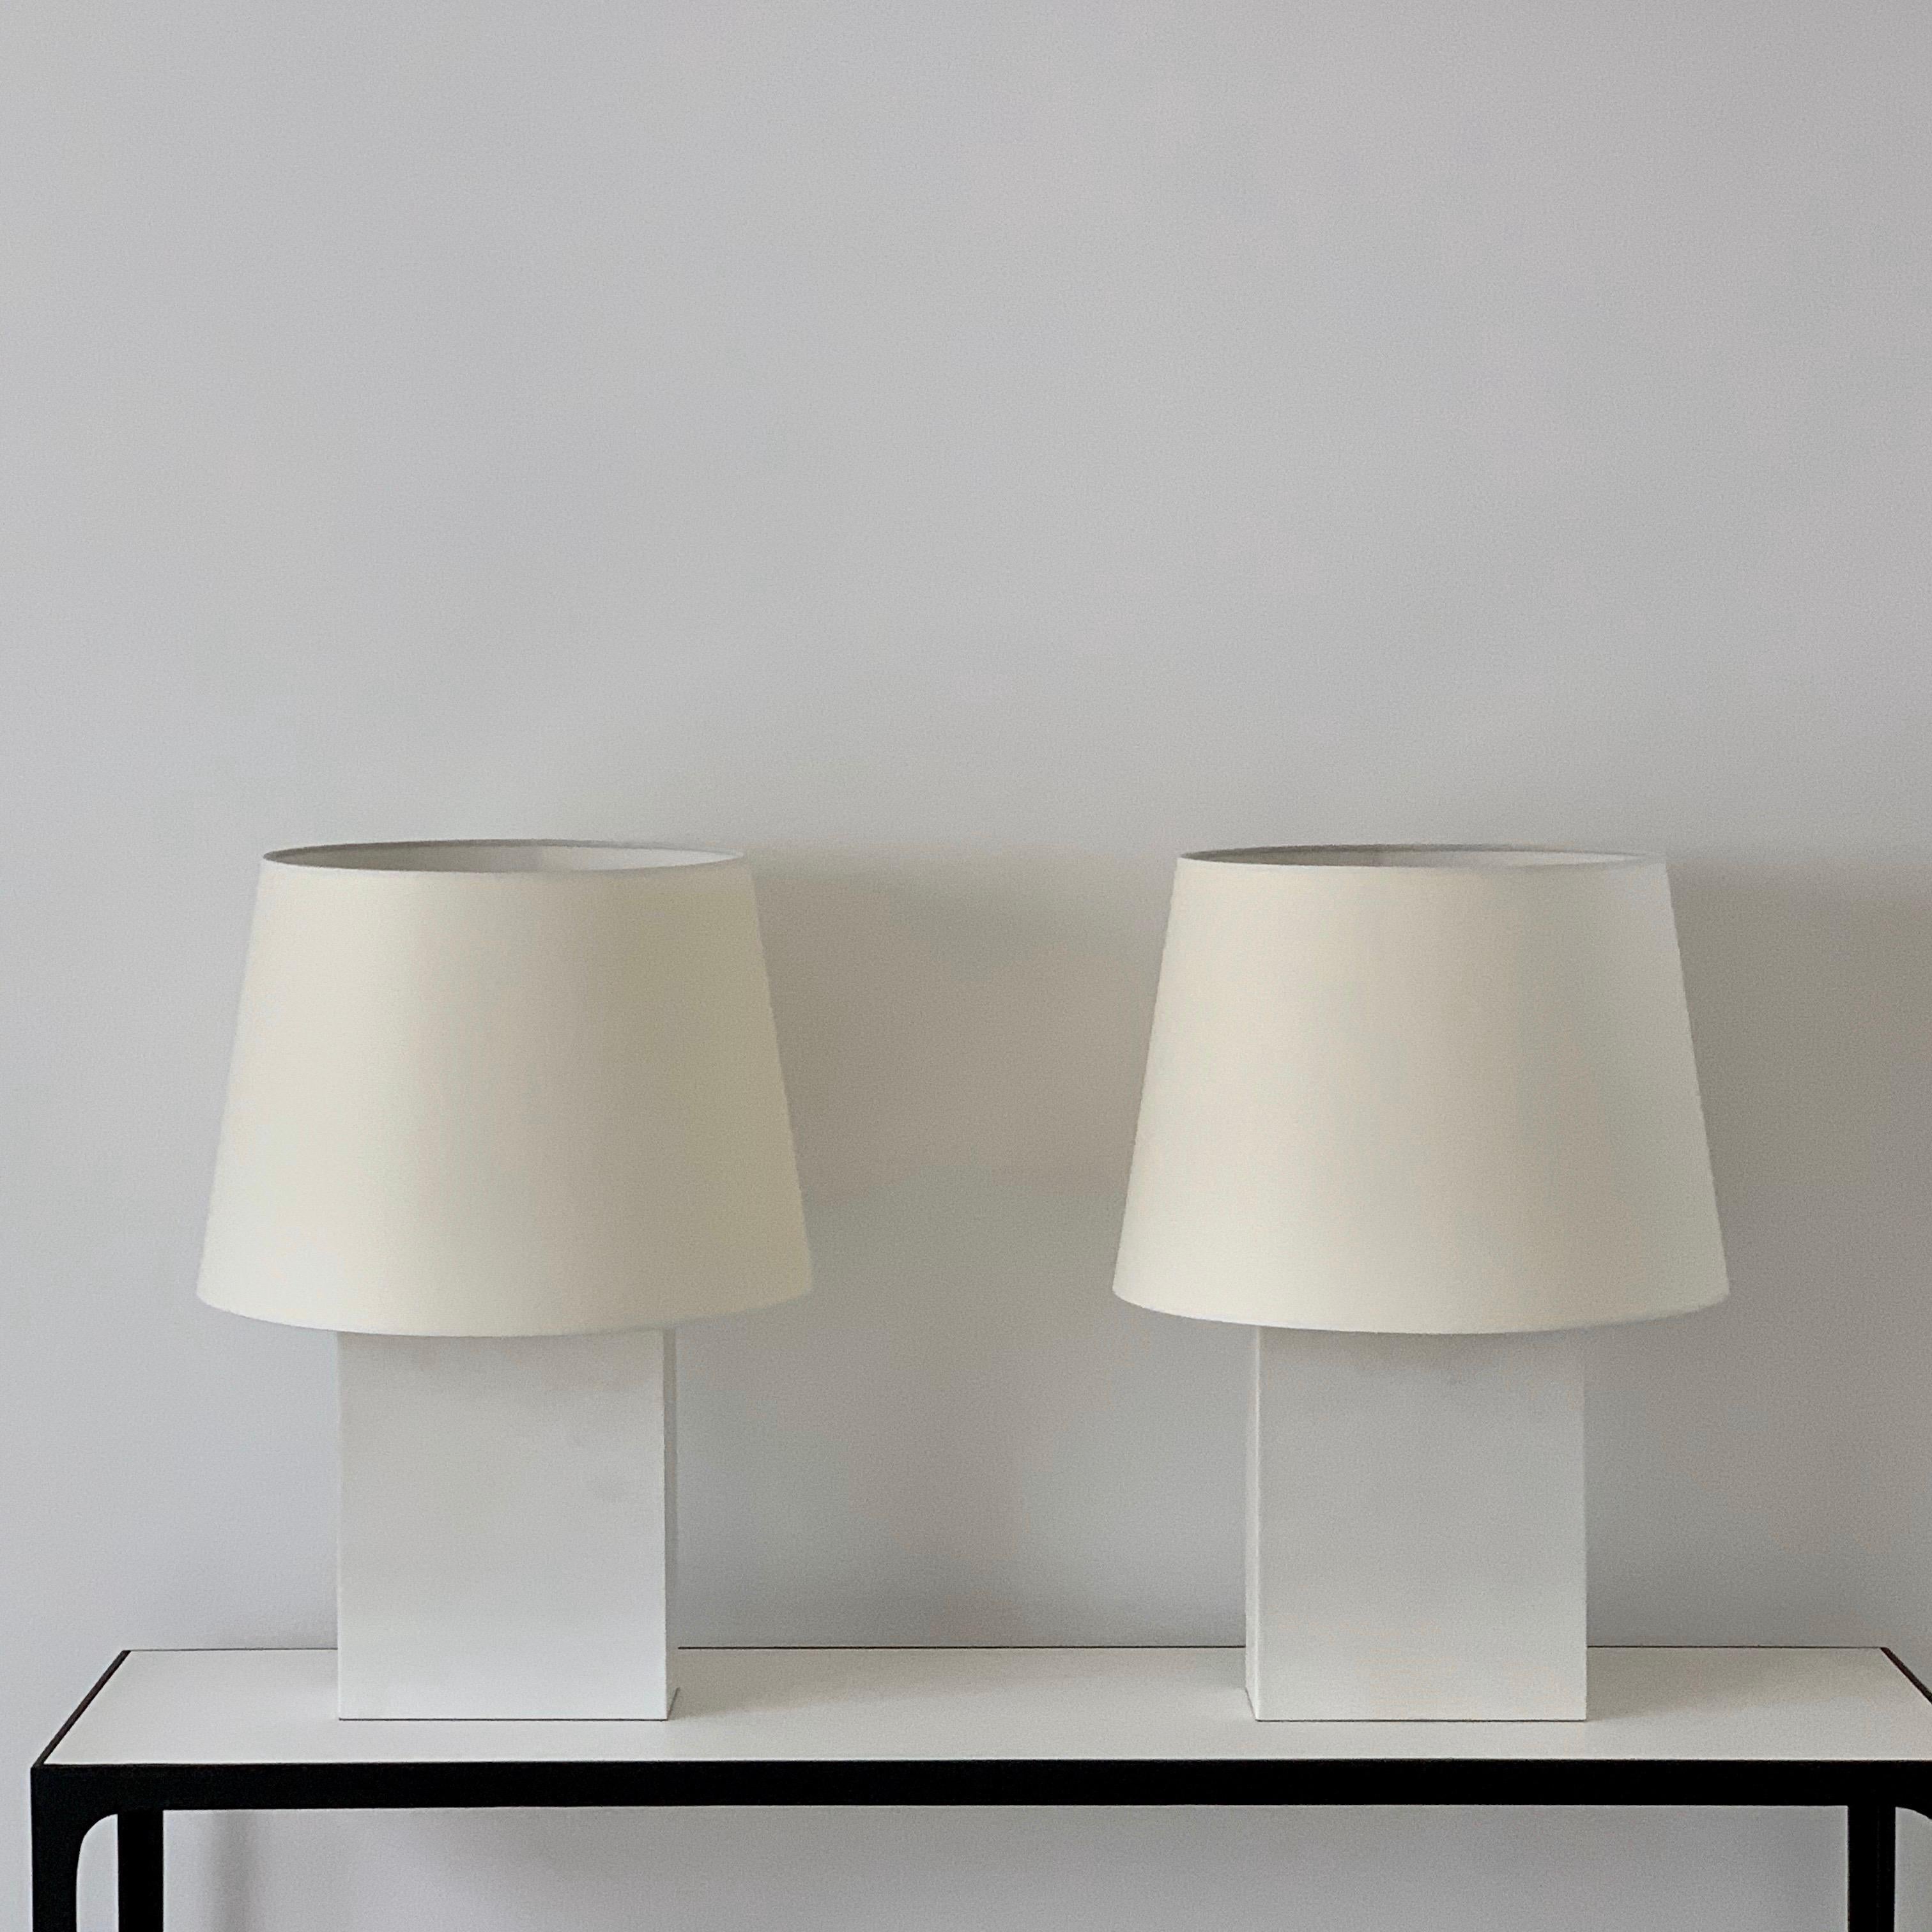 Pair of large 'Bloc' parchment lamps by Design Frères.

Attractive European style shade mounts with no apparent harps / finals. Come with the matching custom paper shades shown.

Handmade with real goatskin parchment and wired with UL listed